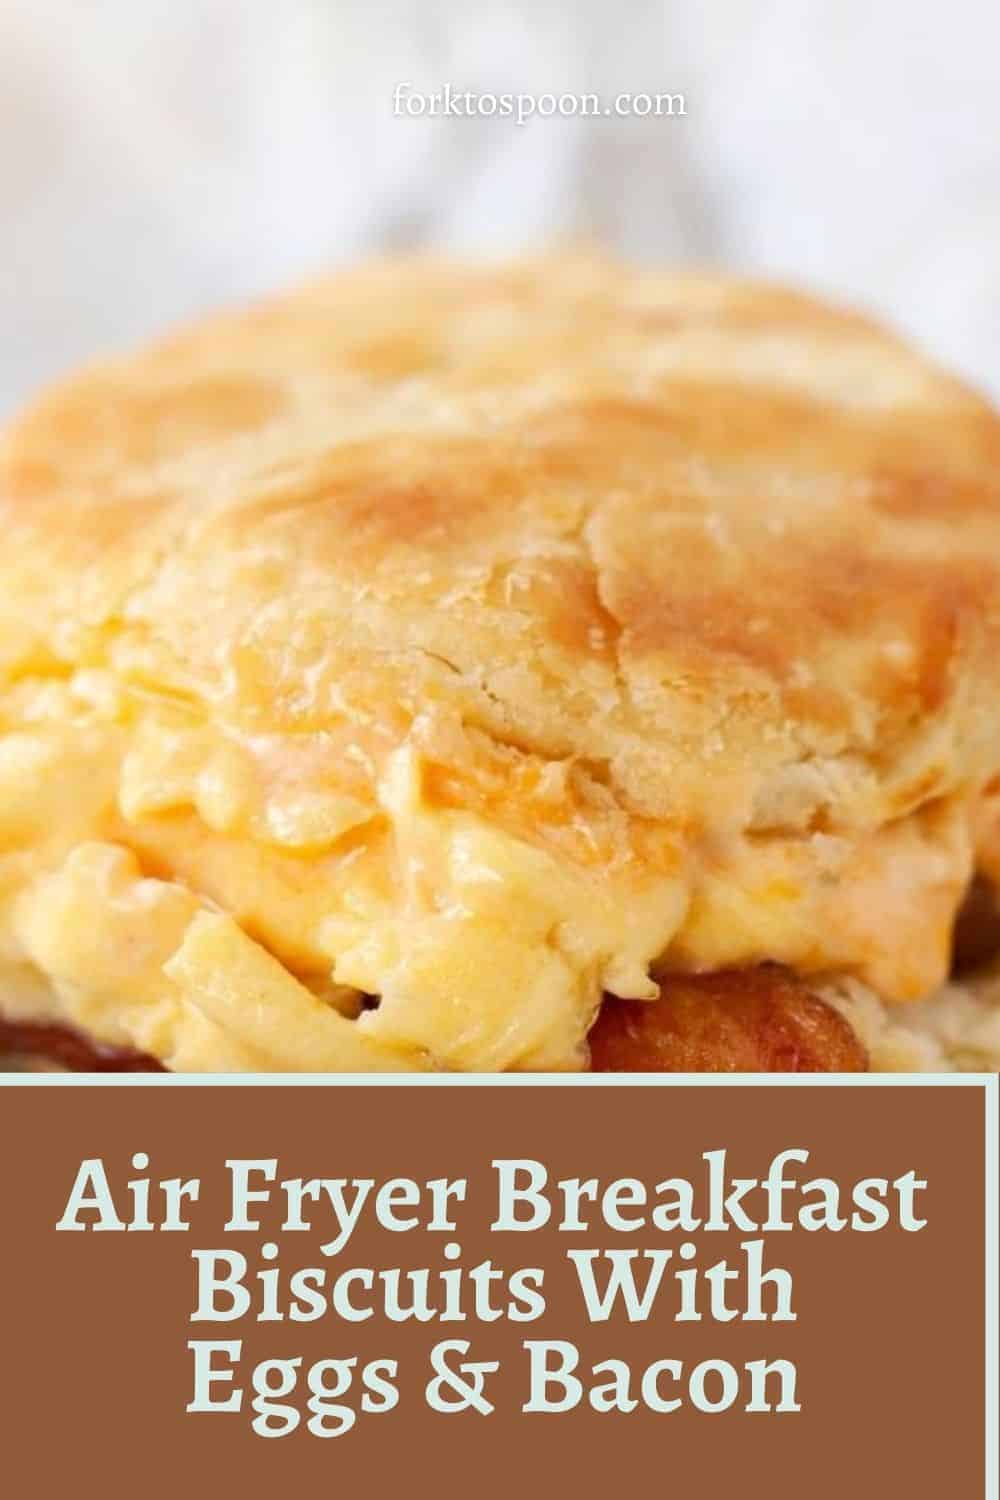 Air Fryer Breakfast Biscuits With Eggs & Bacon